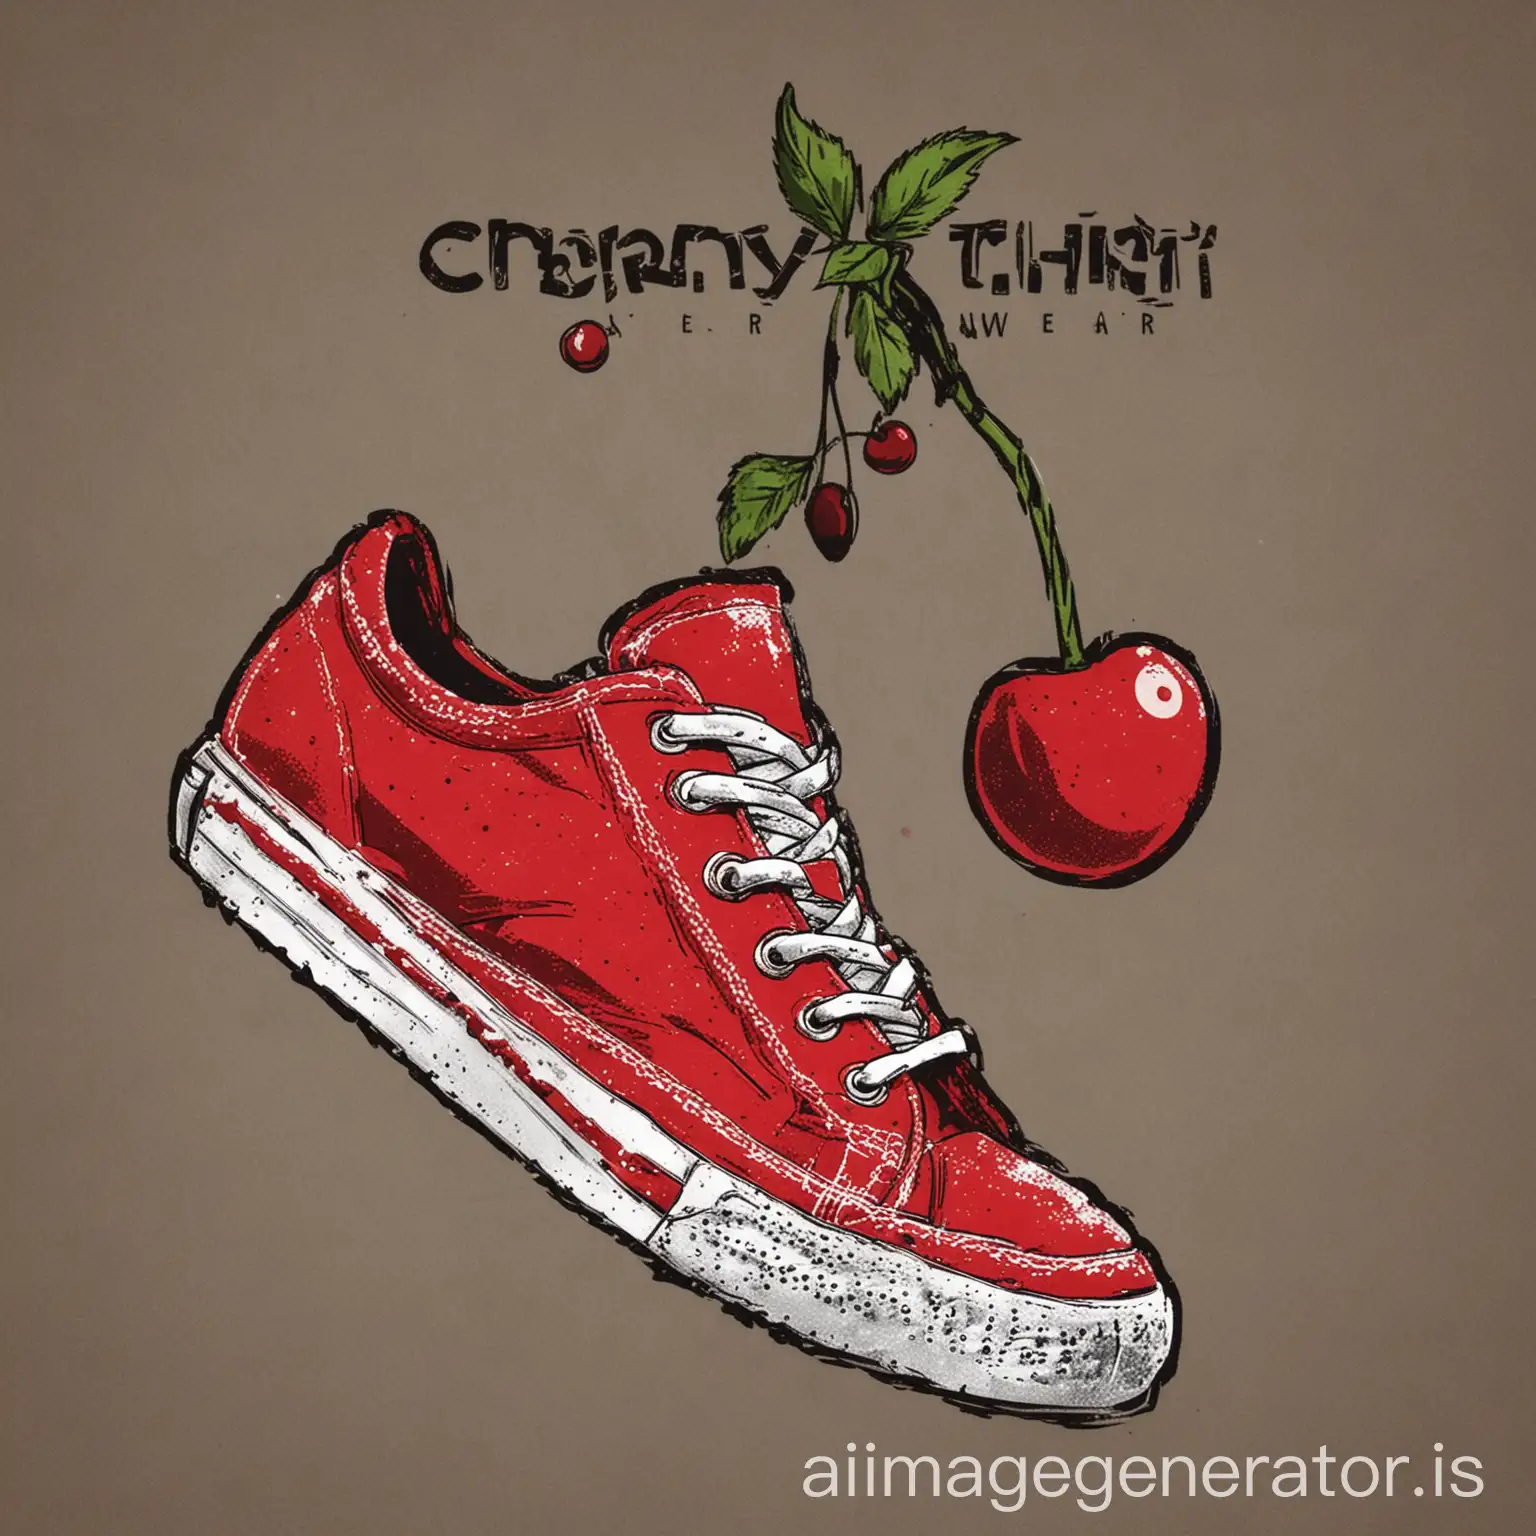 Design a logo for Cherry Thrift Wear where a cherry transforms into a stylish urban sneaker, with no cartoonish elements or overly bright colors.